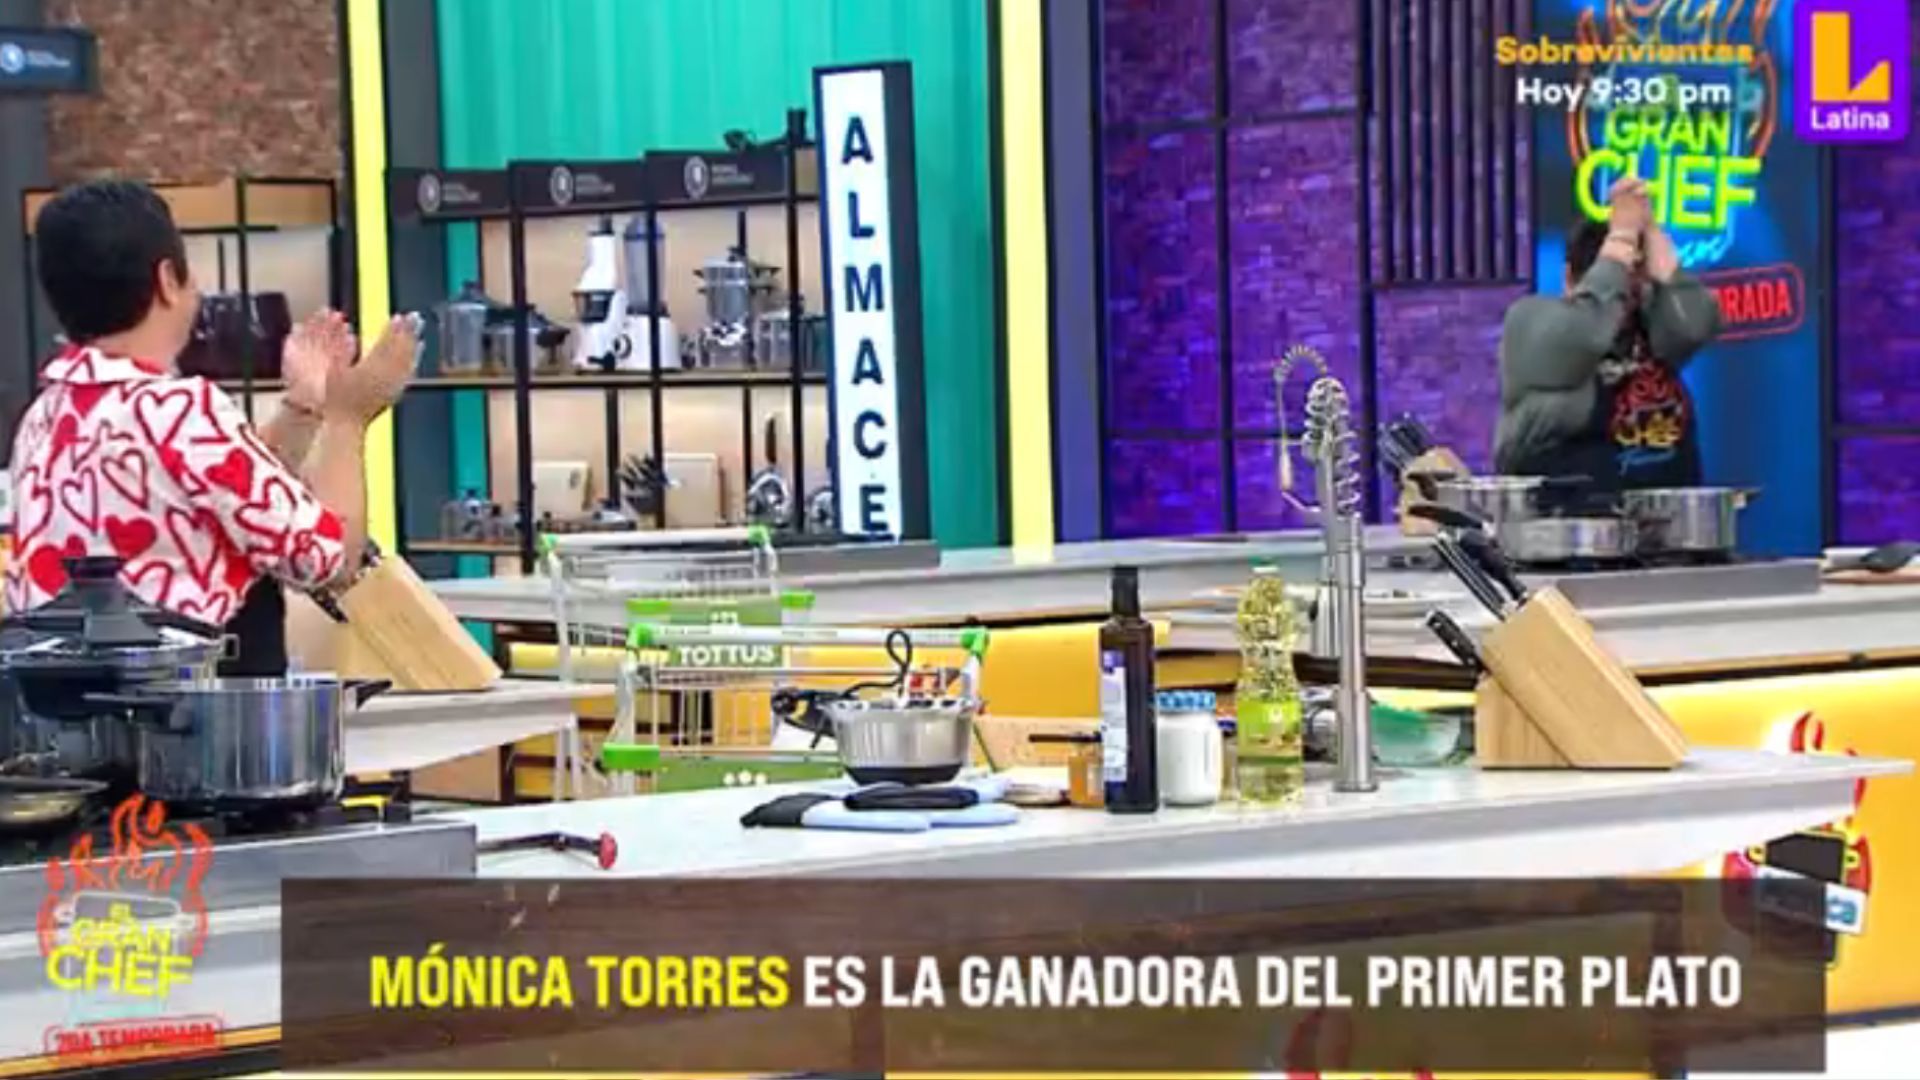 The Great Celebrity Chef.  Latin TV.